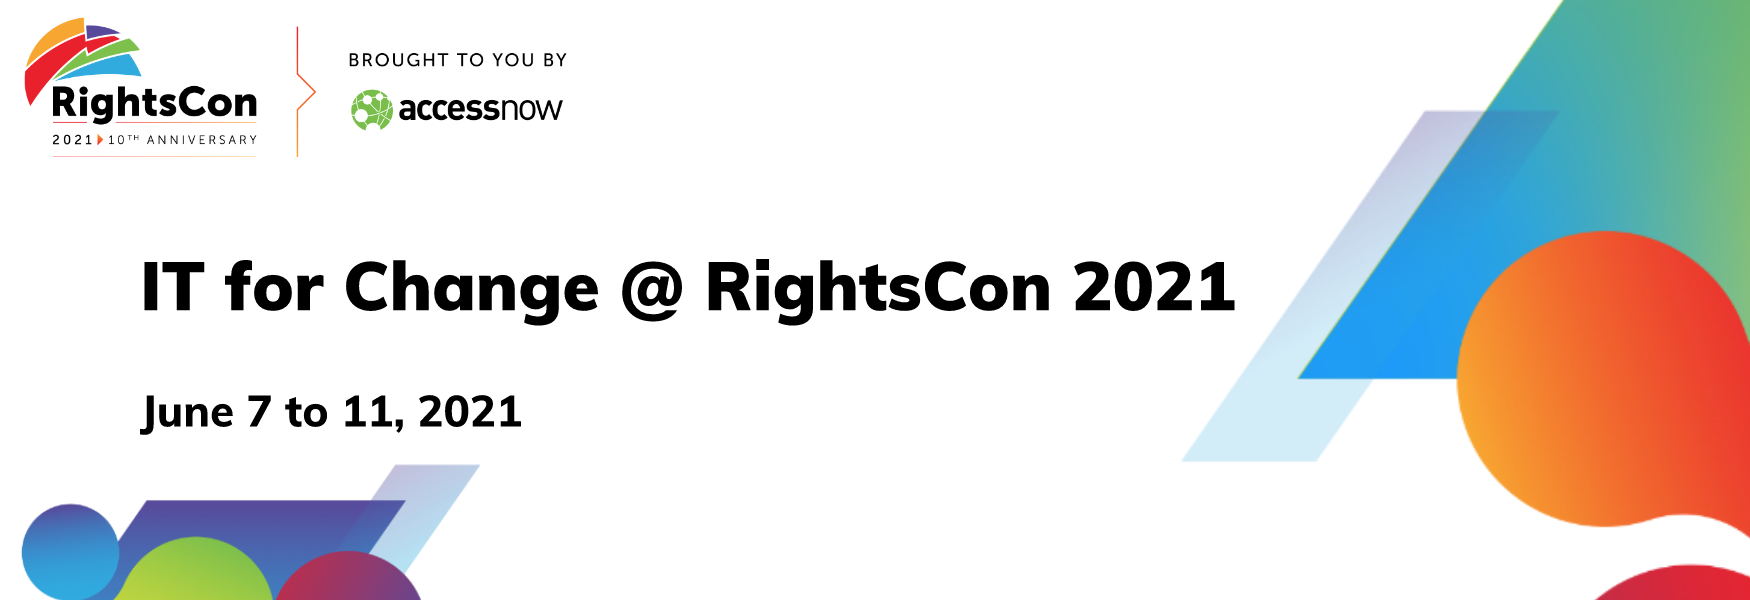 IT for Change at RightsCon 2021